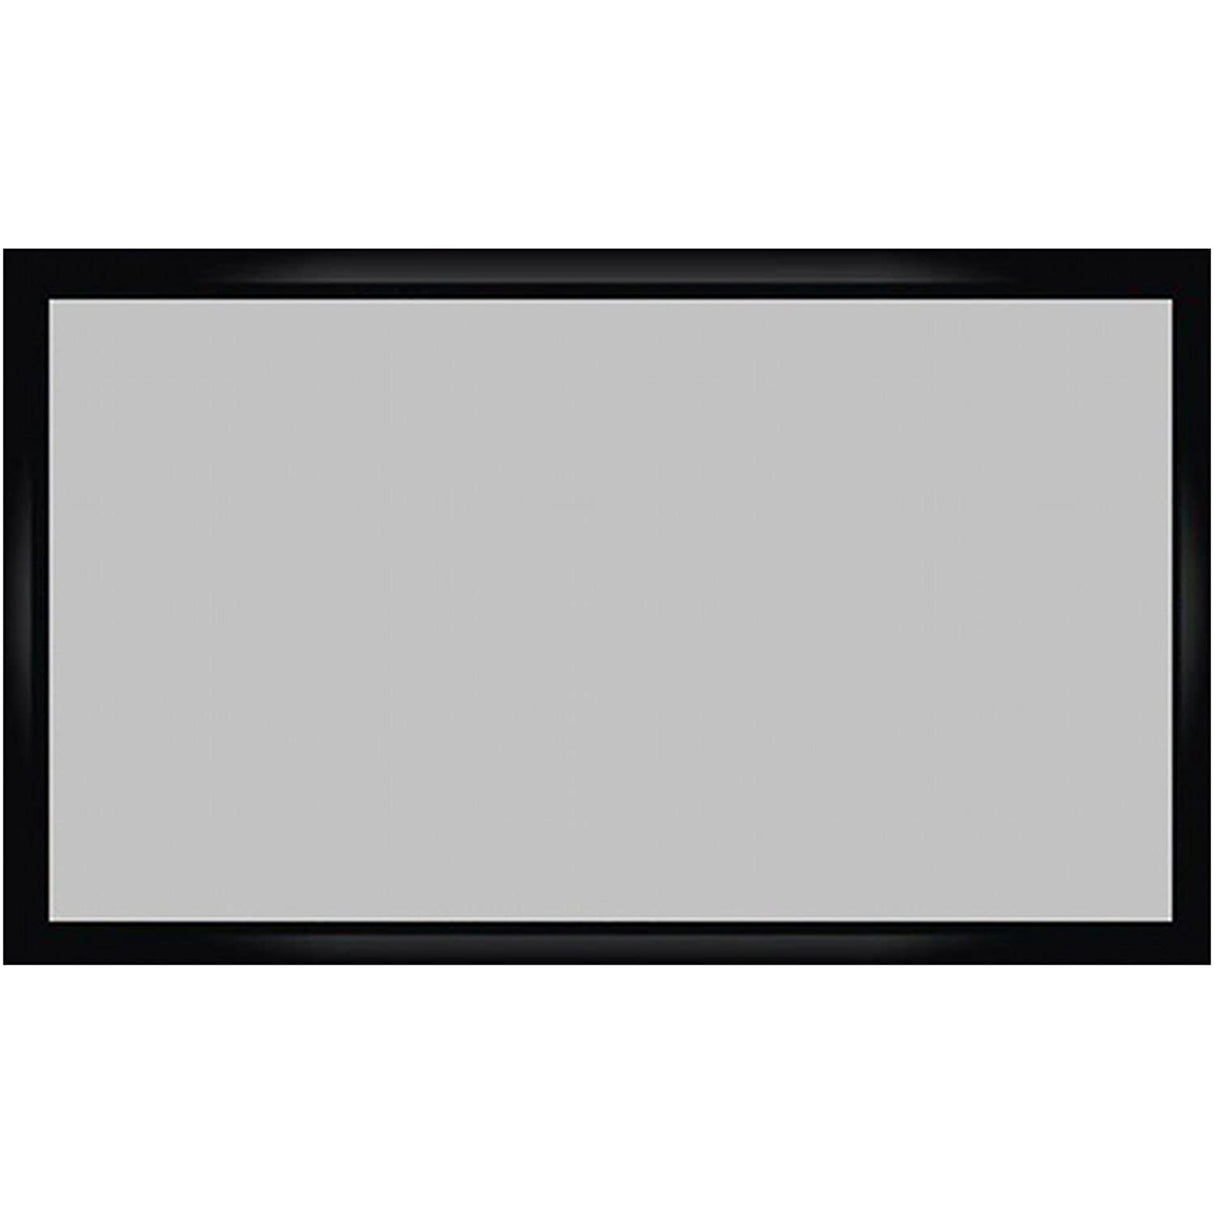 Prime Eco-line Grey Fabric Ambient Light Rejection (ALR) Flat Fixed Frame Projection Screen 100" (For Long Throw Projectors)